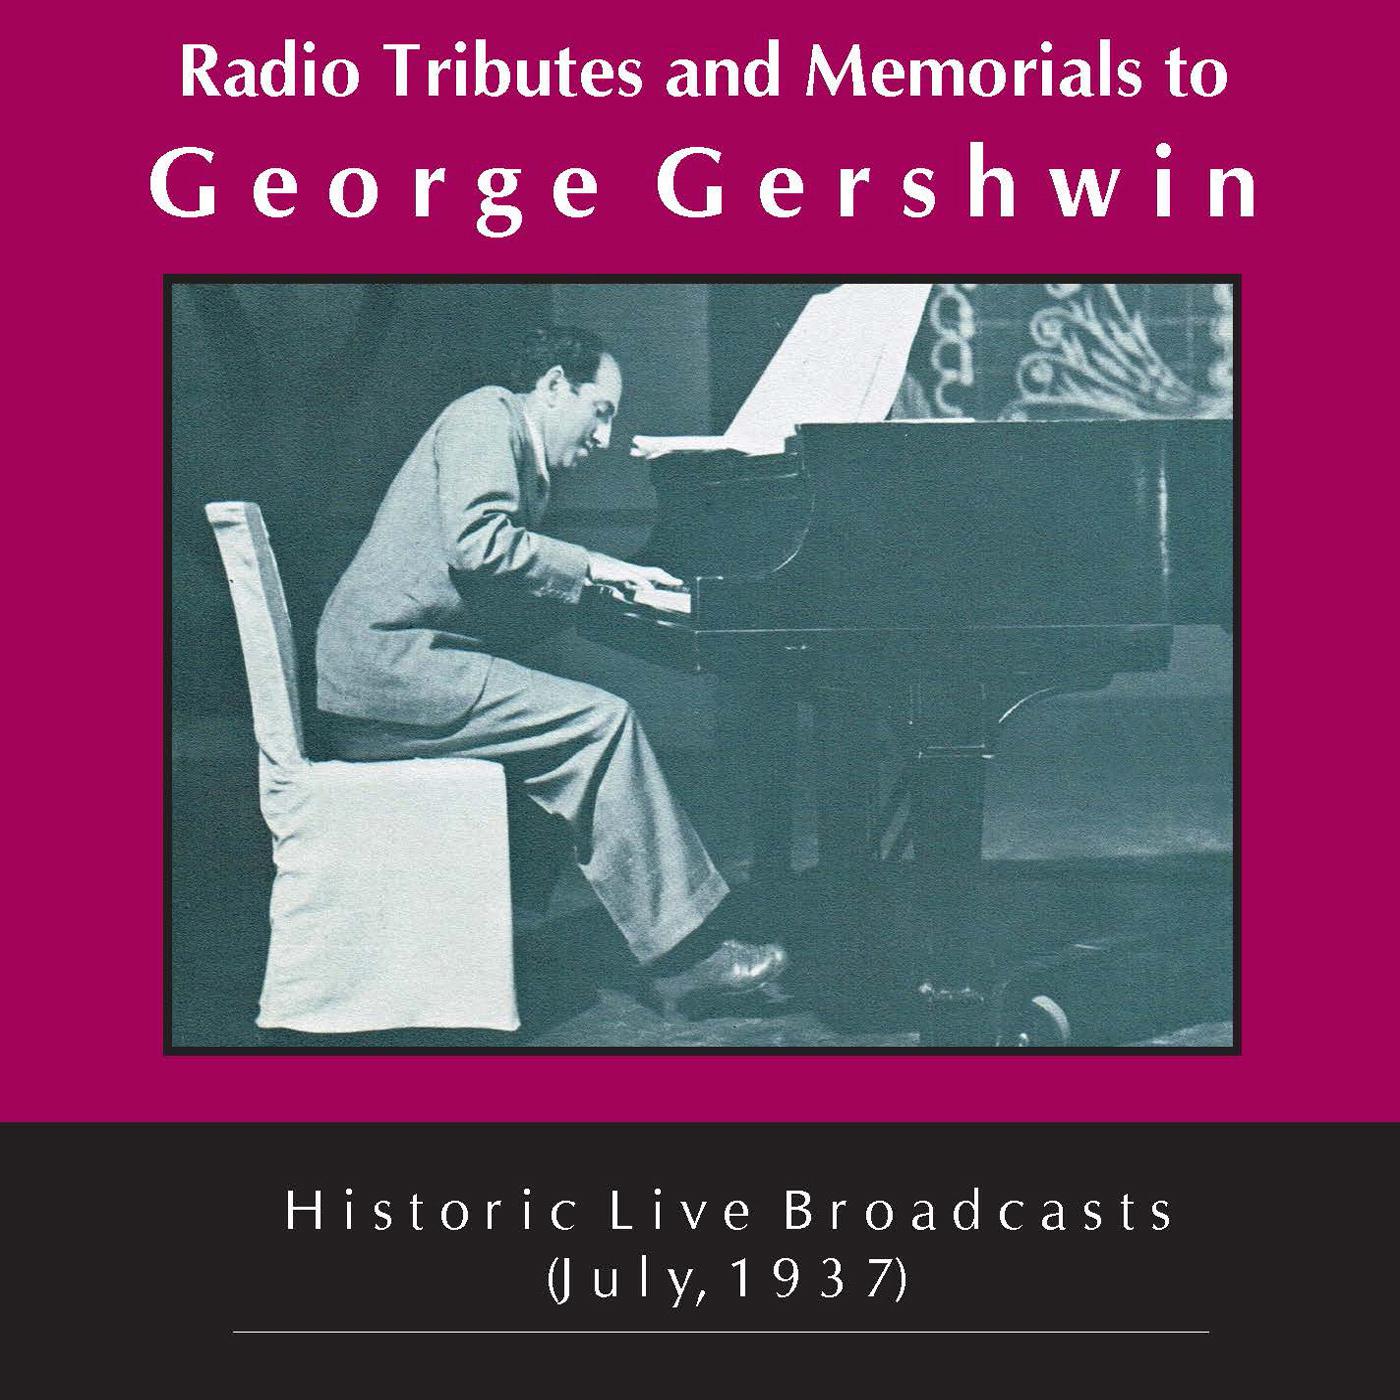 GERSHWIN, G.: Radio Tributes and Memorials (Historical Live Broadcasts, July 1937)